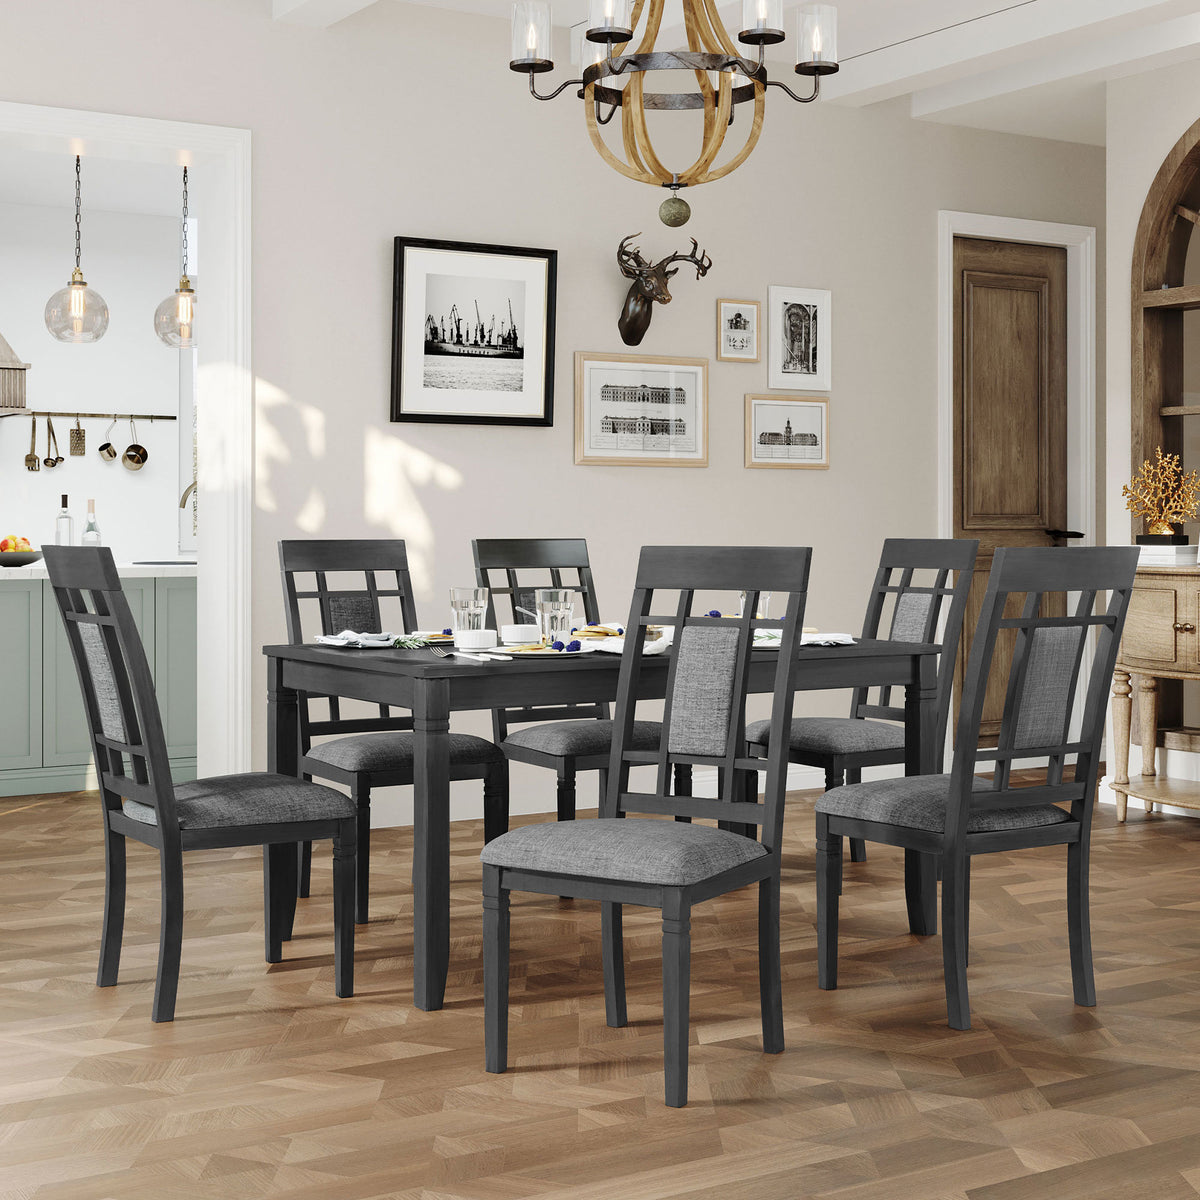 7-Piece Farmhouse Rustic Wooden Dining Table Set  with 6 Padded Dining Chairs